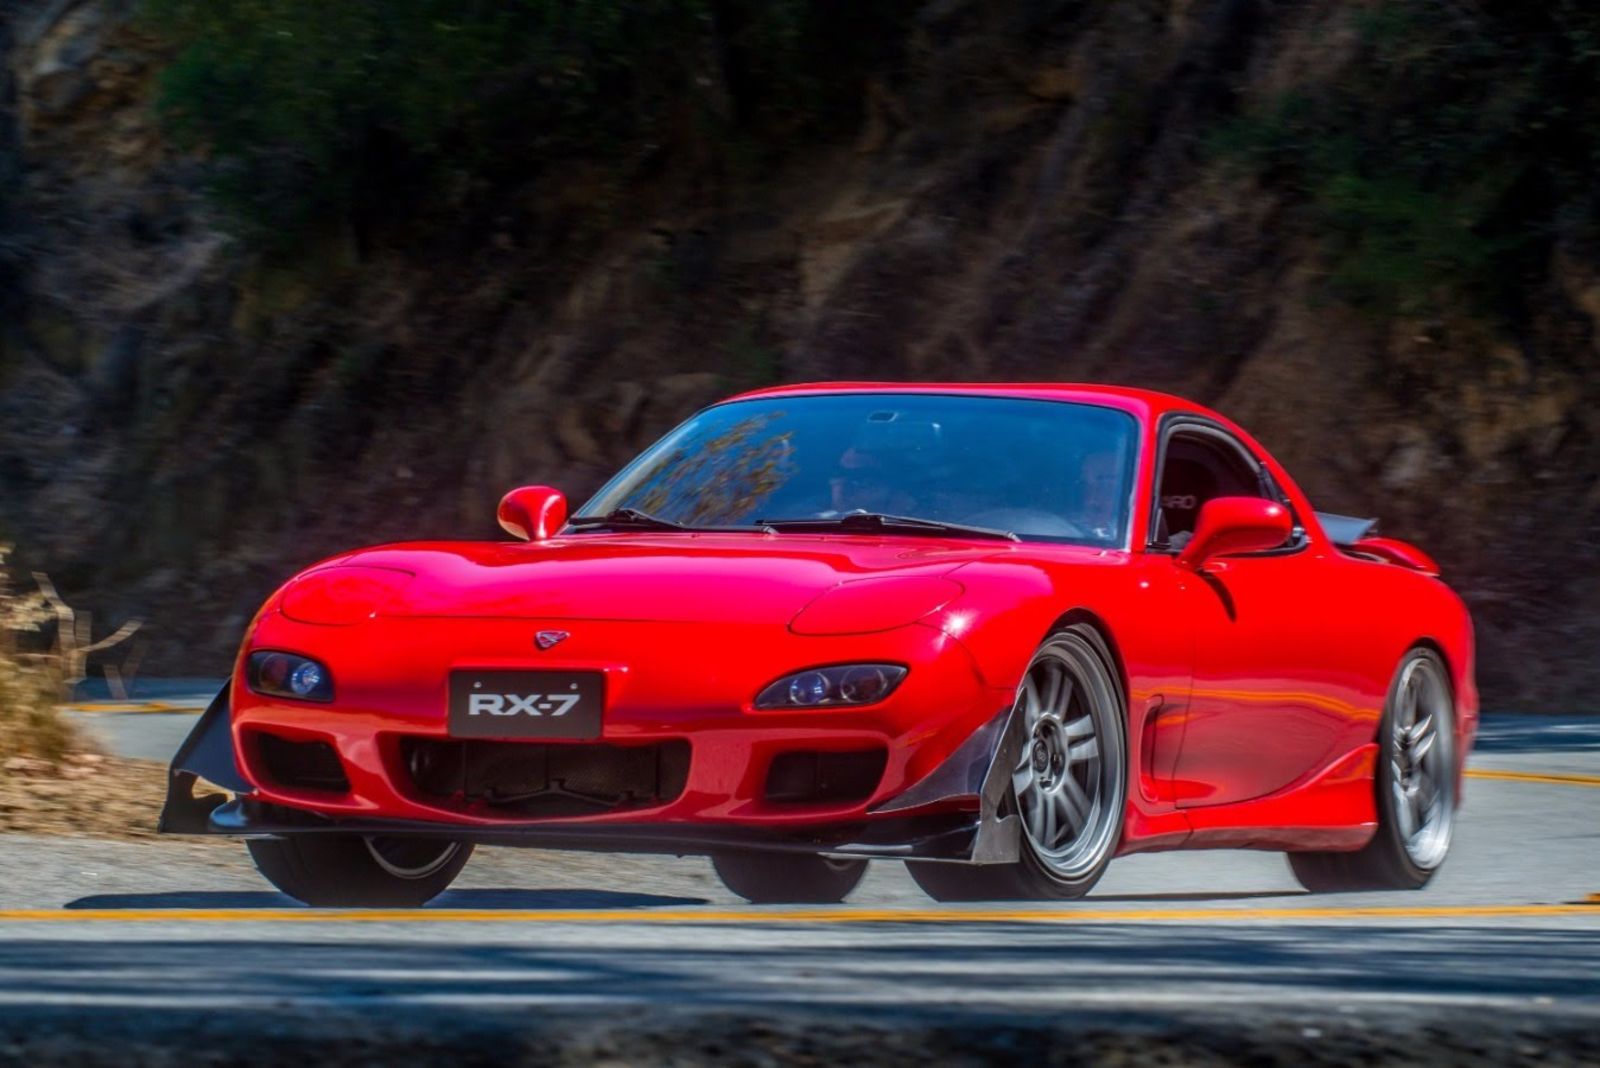 FD Rx7 for the purpose of canyon carving/fun street driving and bringing to car meets, preferably in red